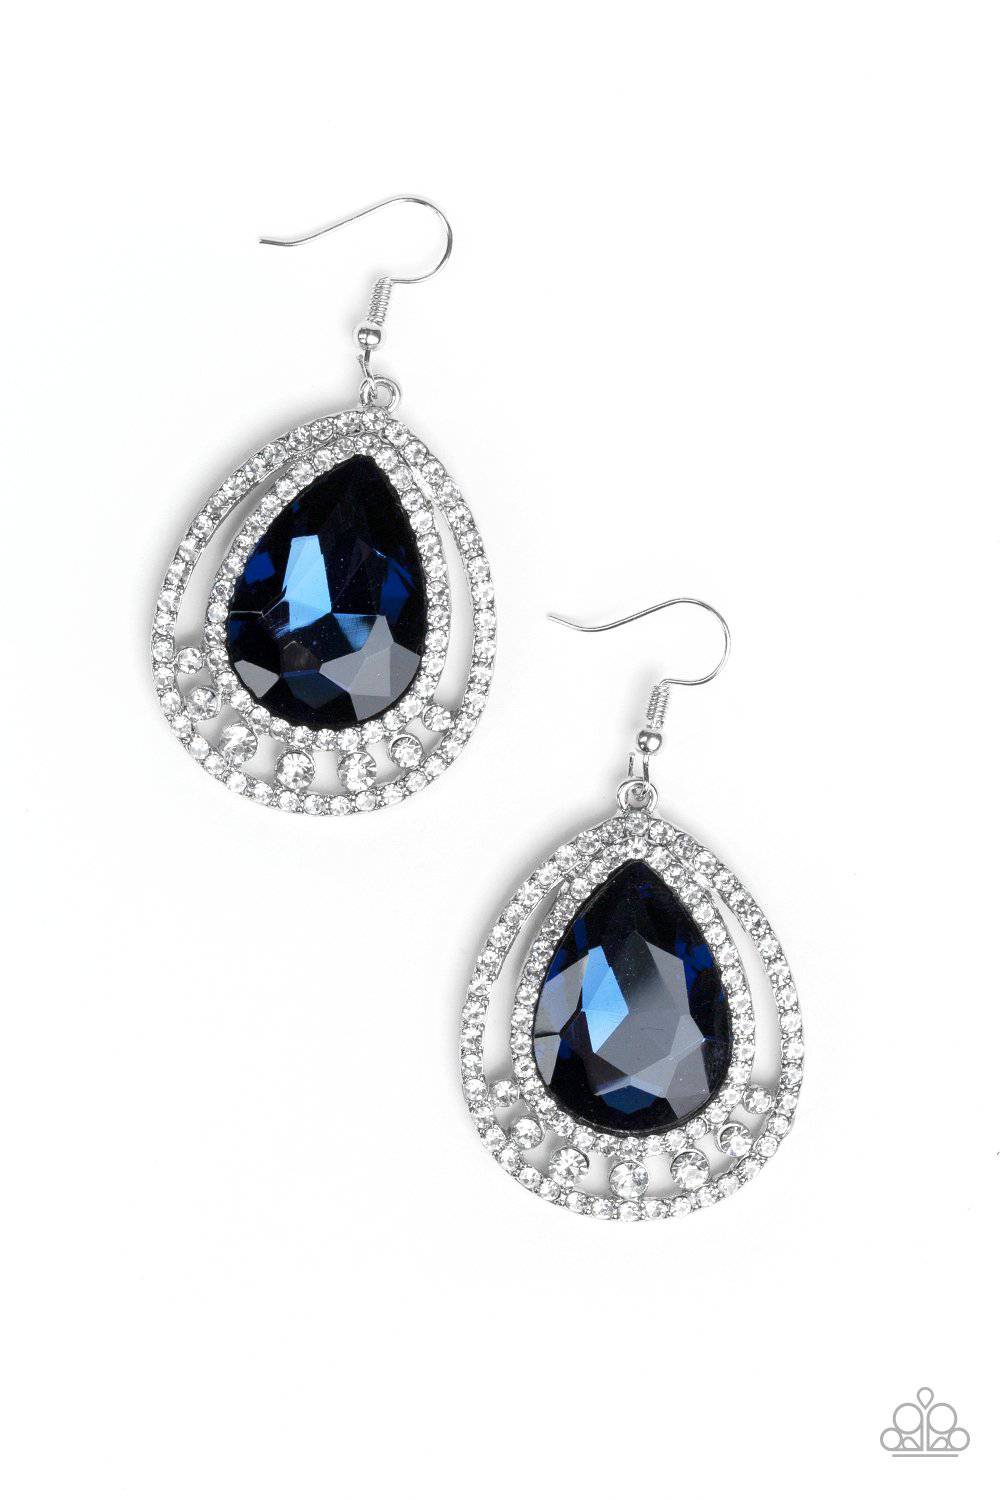 All Rise For Her Majesty - Blue & White Rhinestone Earrings - Paparazzi Accessories - GlaMarous Titi Jewels